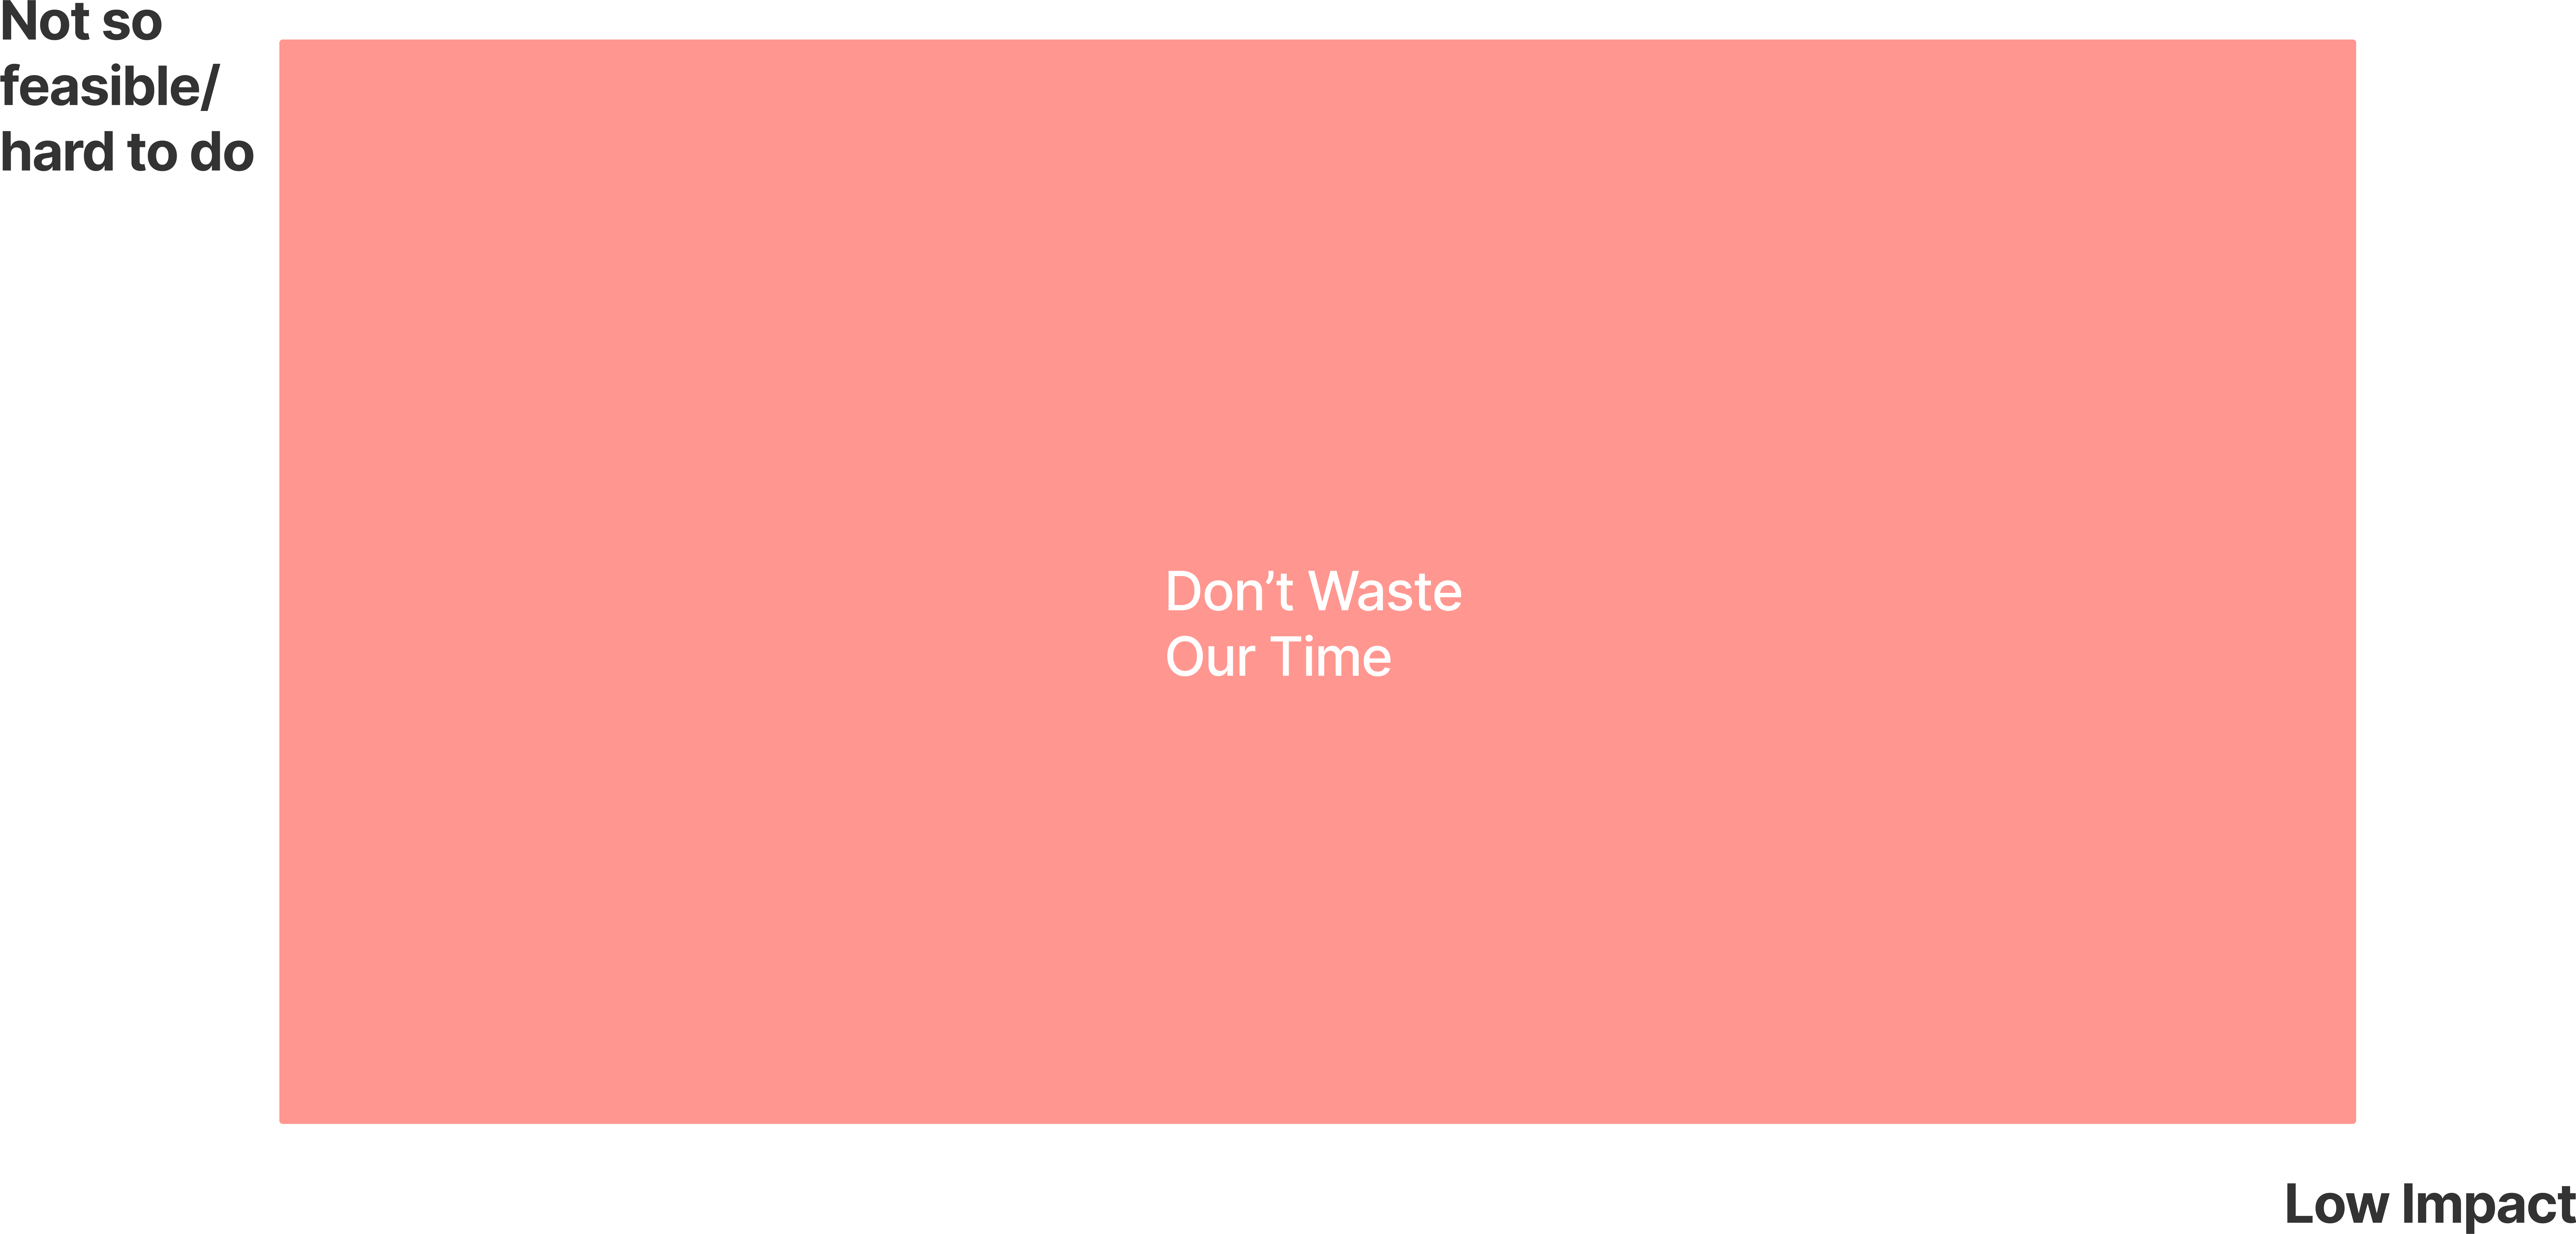 Don't waste our time (Low Impact/Low Feasibility)